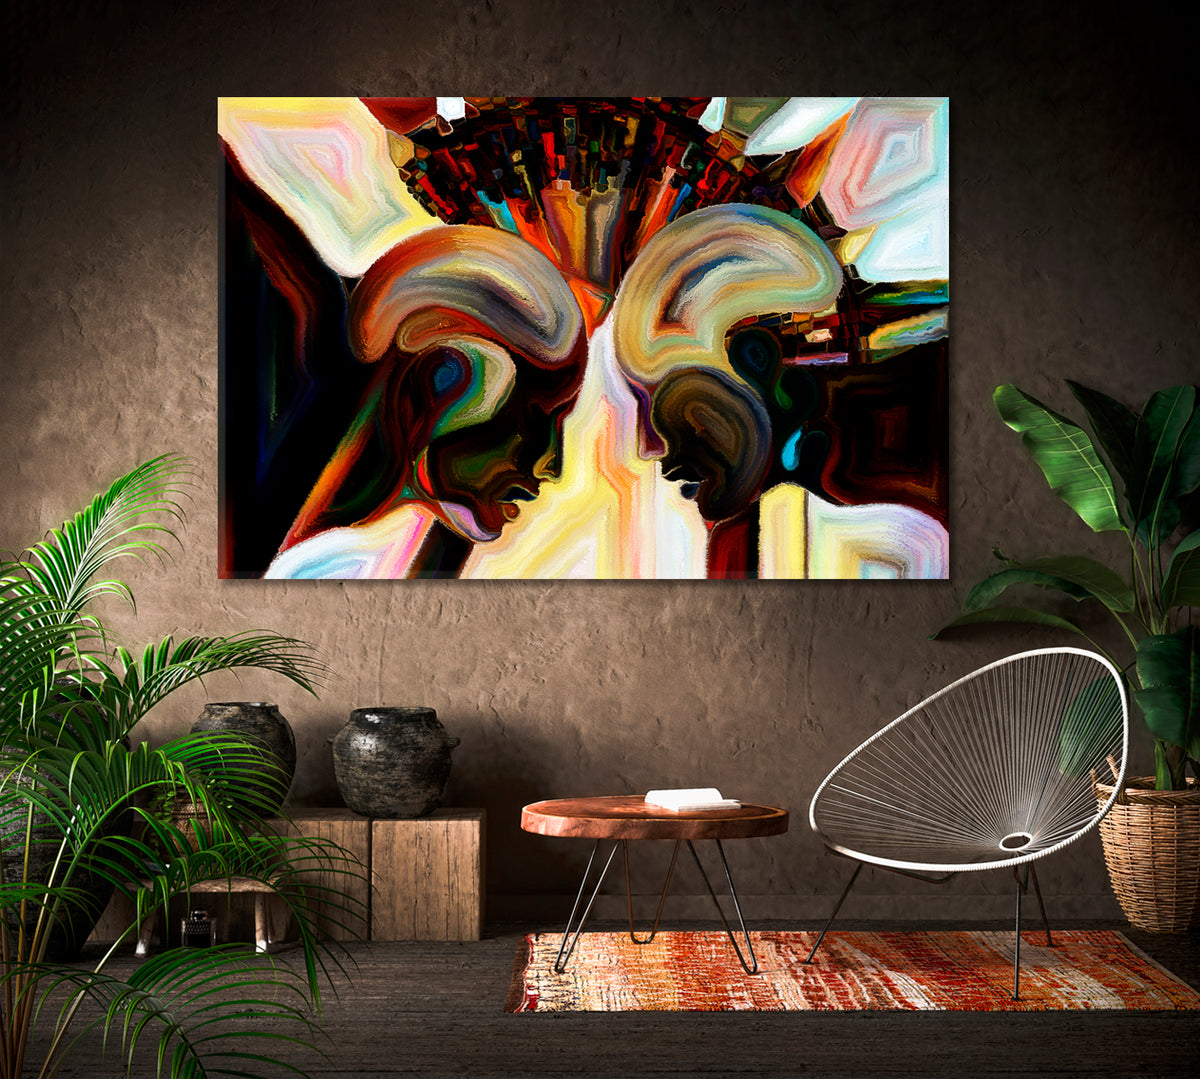 Contemporary Amazing Abstract Forms Design Canvas Print Consciousness Art Artesty 1 panel 24" x 16" 